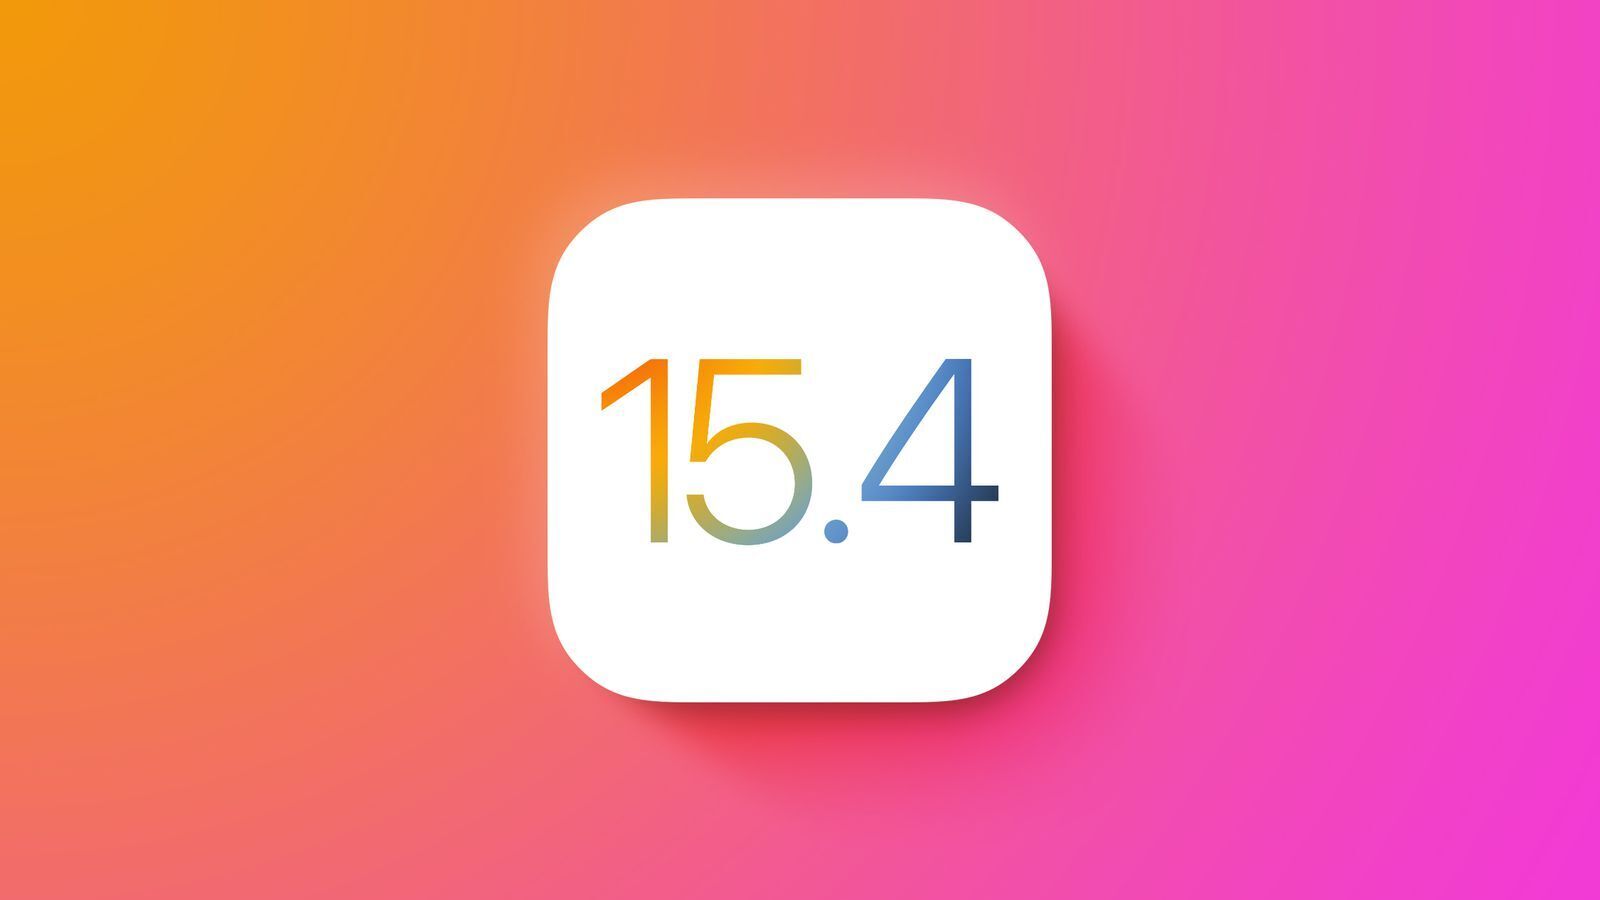 Everything You Need to Know about New iOS 15.4 Features